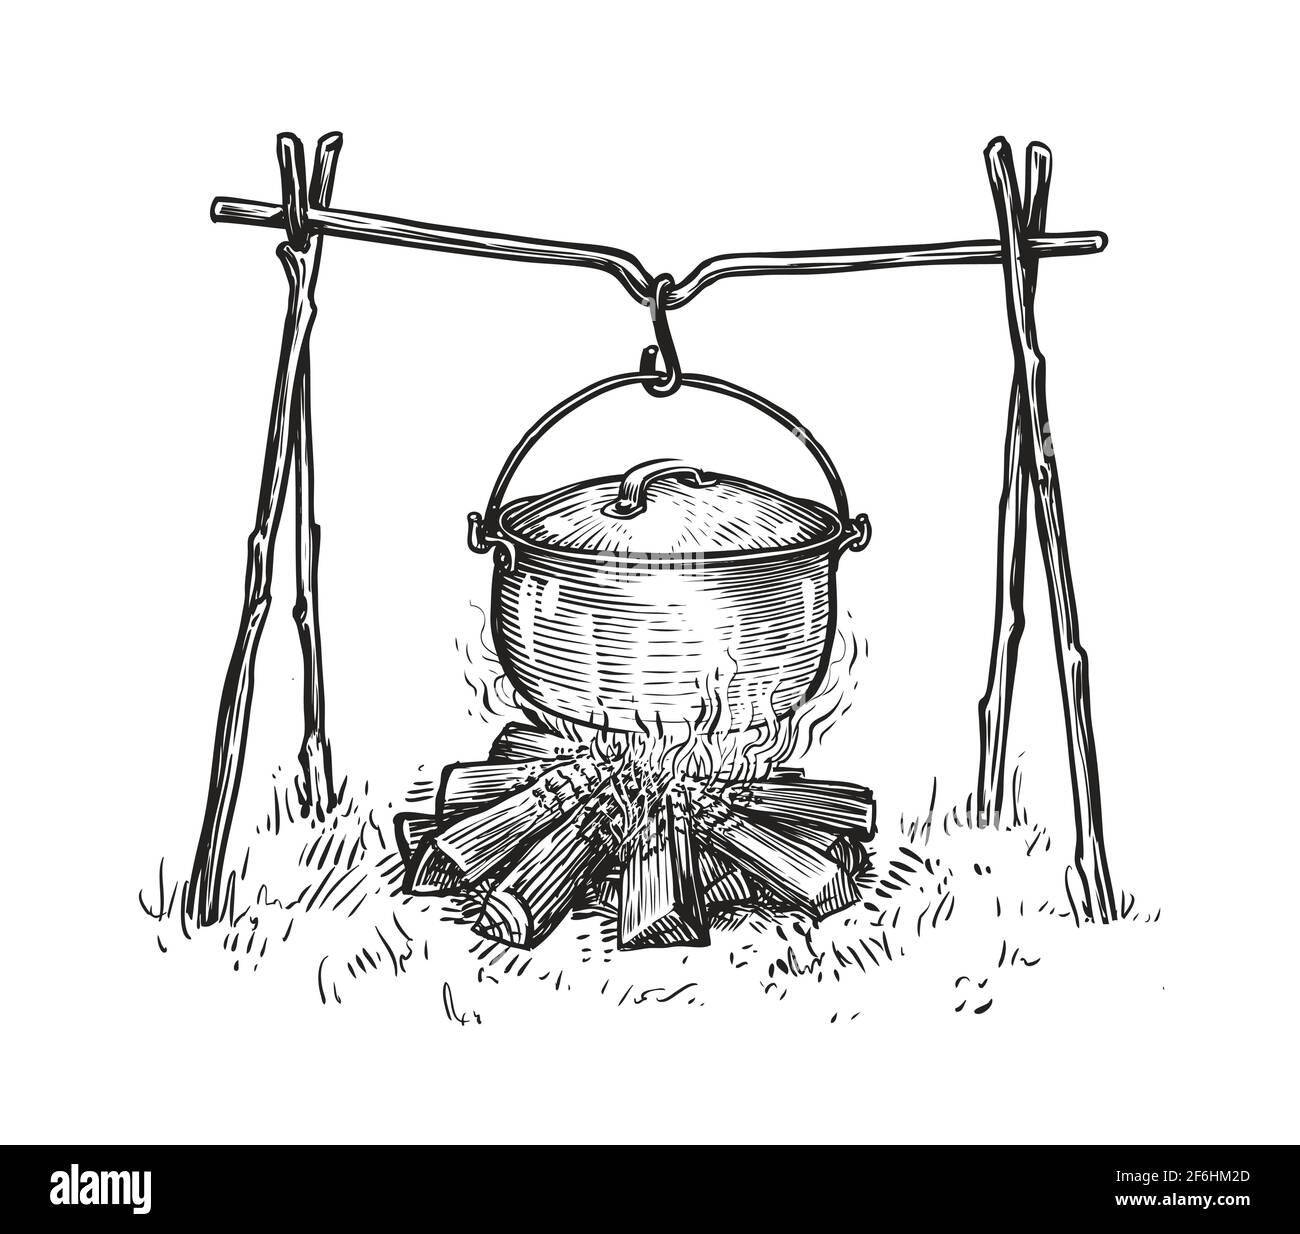 Pot on campfire sketch. Cooking in a cauldron on flame. Hand drawn vector illustration Stock Vector